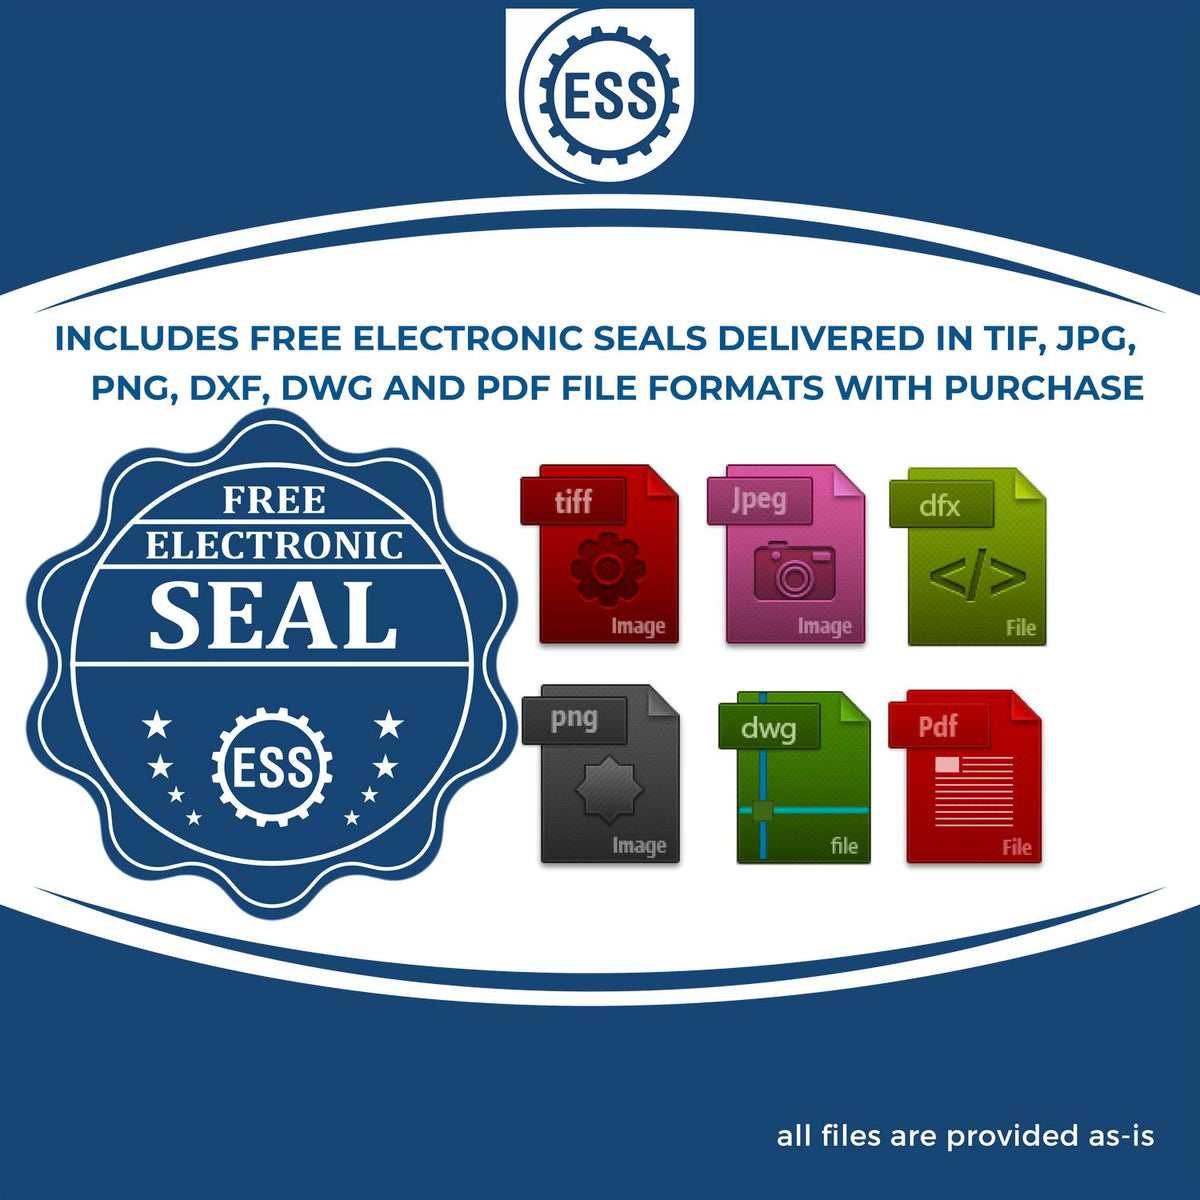 An infographic for the free electronic seal for the Hybrid Texas Engineer Seal illustrating the different file type icons such as DXF, DWG, TIF, JPG and PNG.